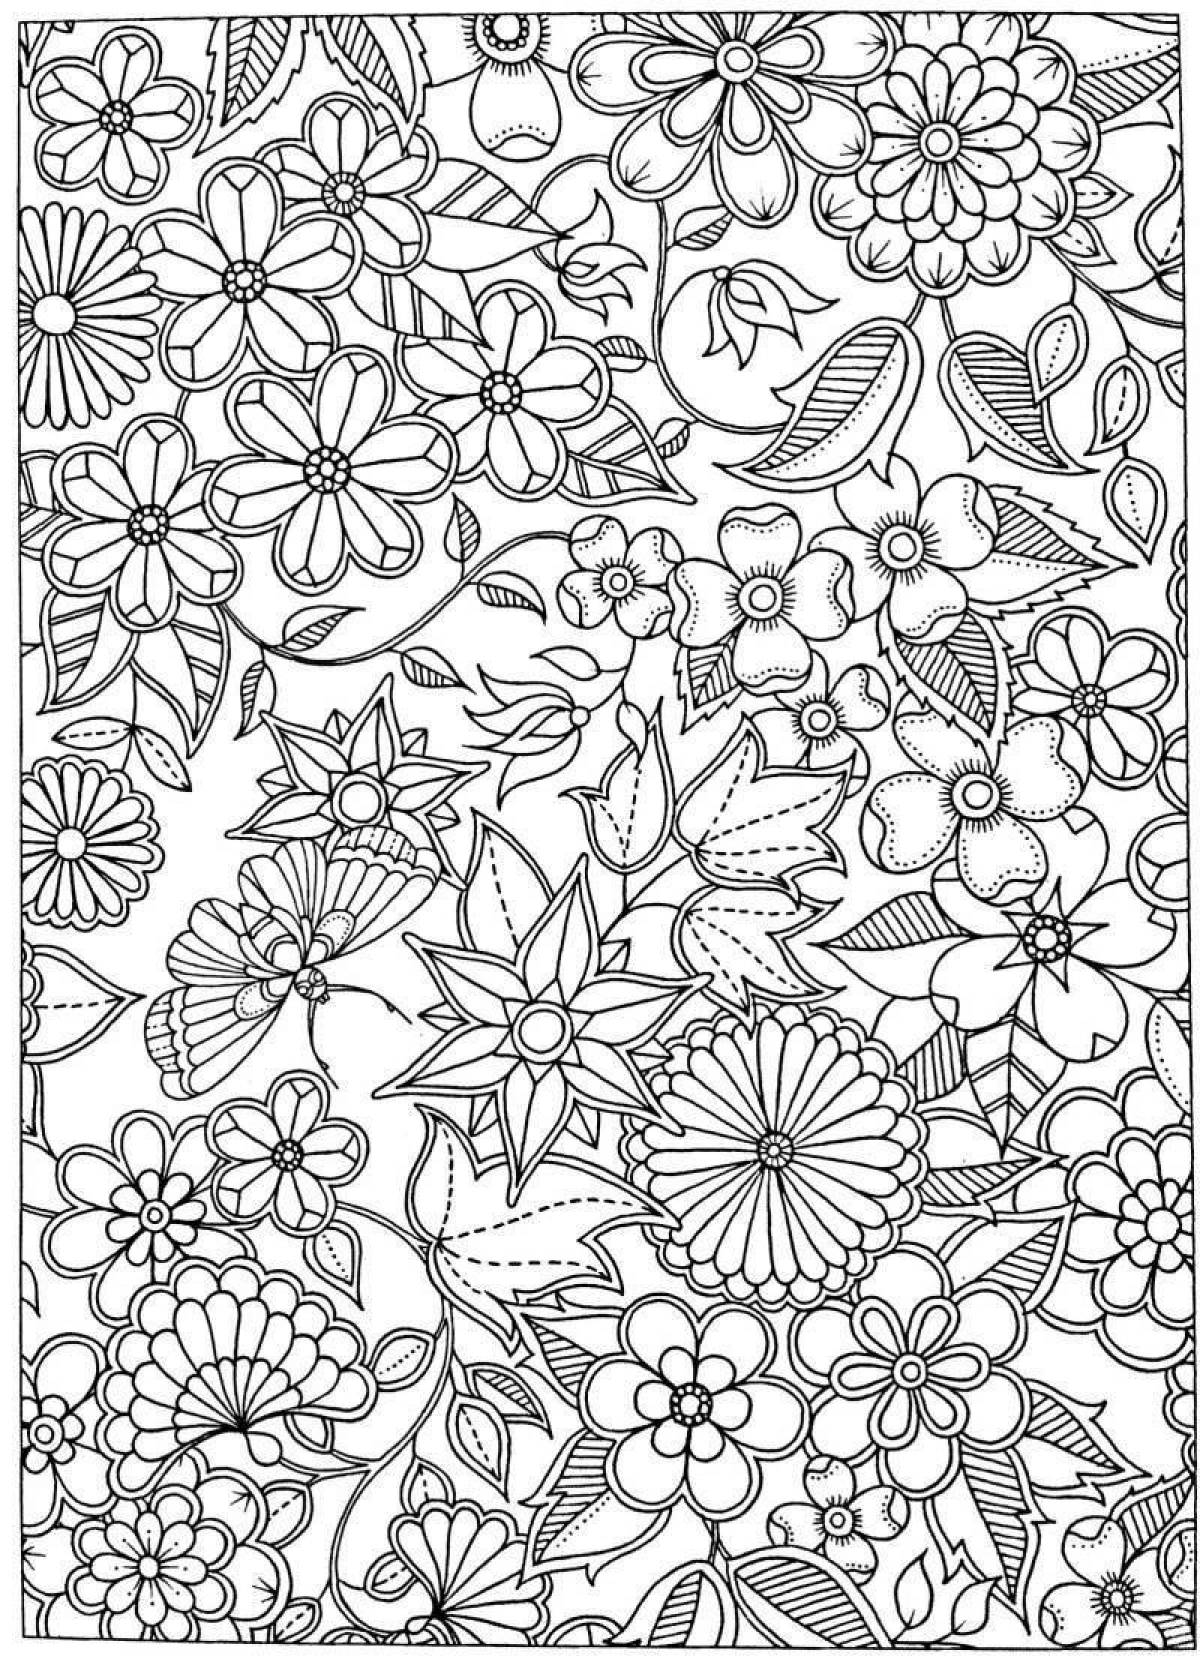 Harmonious demons coloring pages